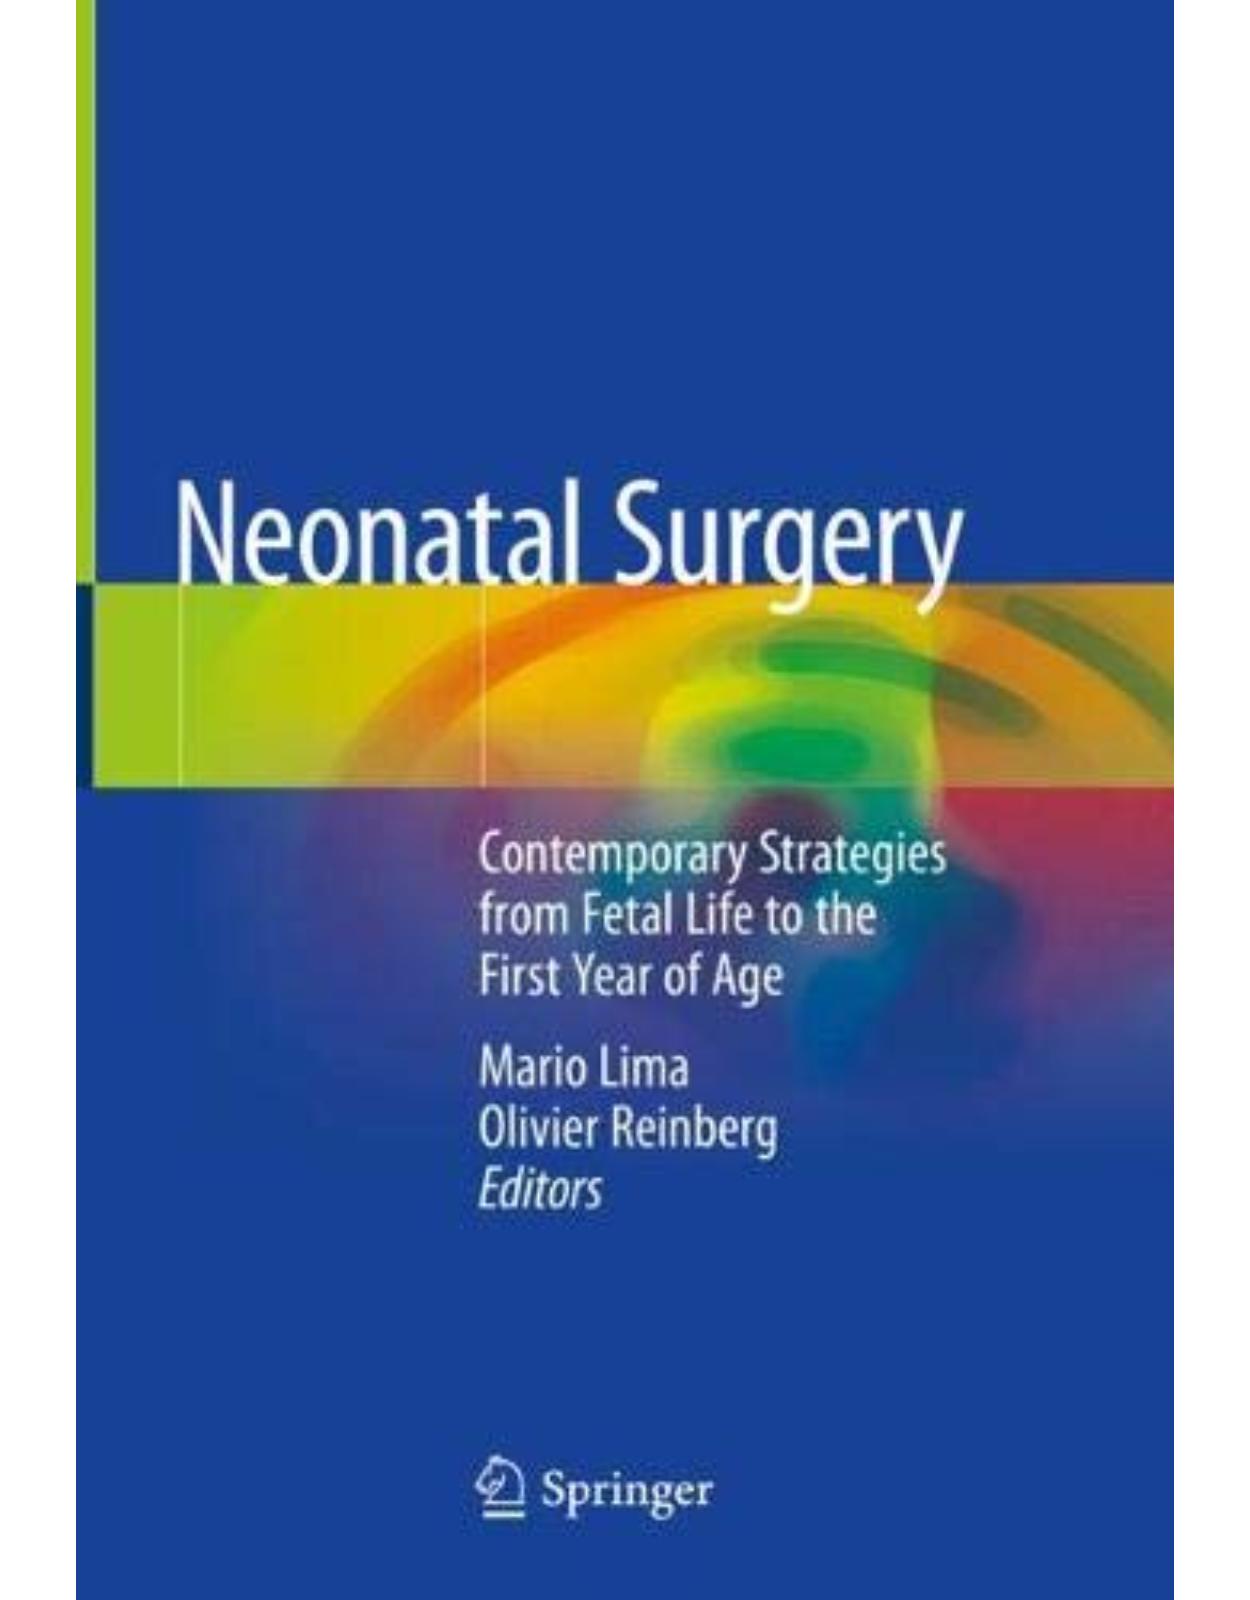 Neonatal SurgeryContemporary Strategies from Fetal Life to the First Year of Age